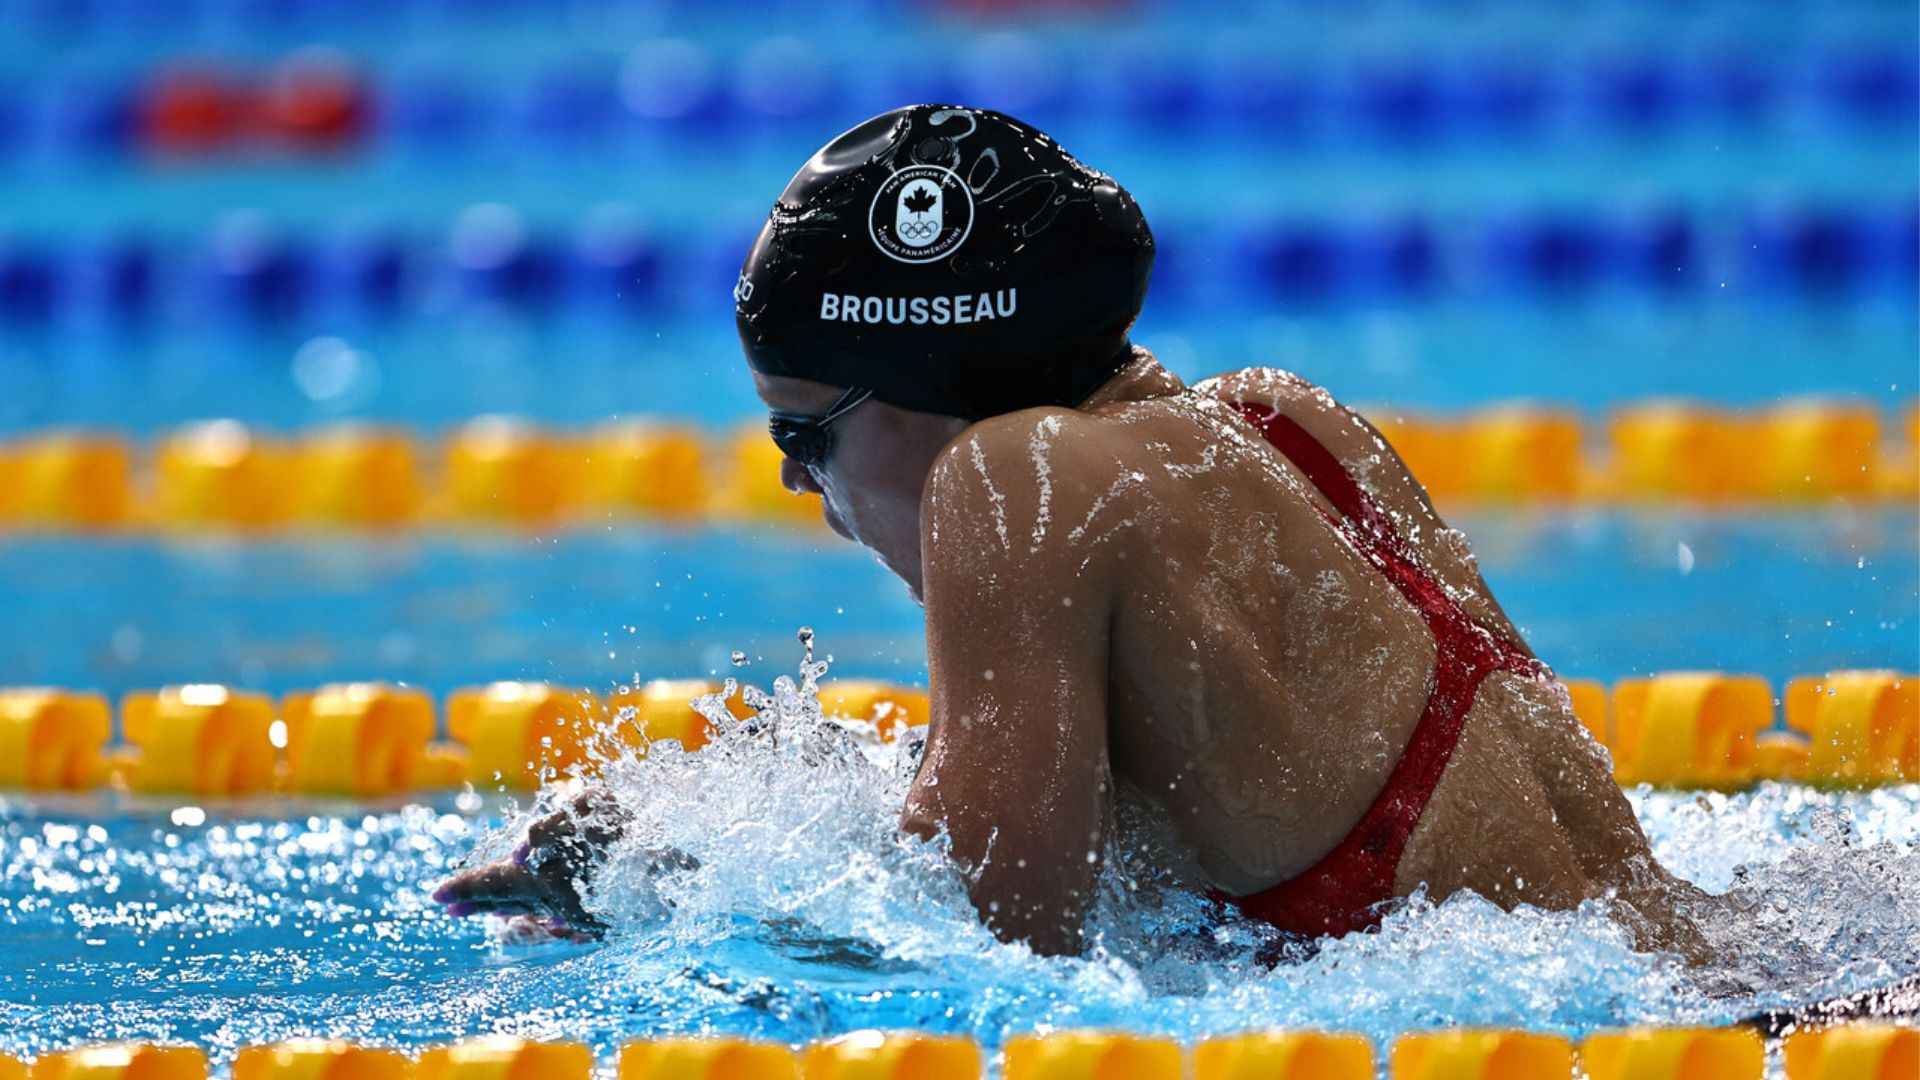 Julie Brousseau won her second gold medal in swimming at Santiago 2023